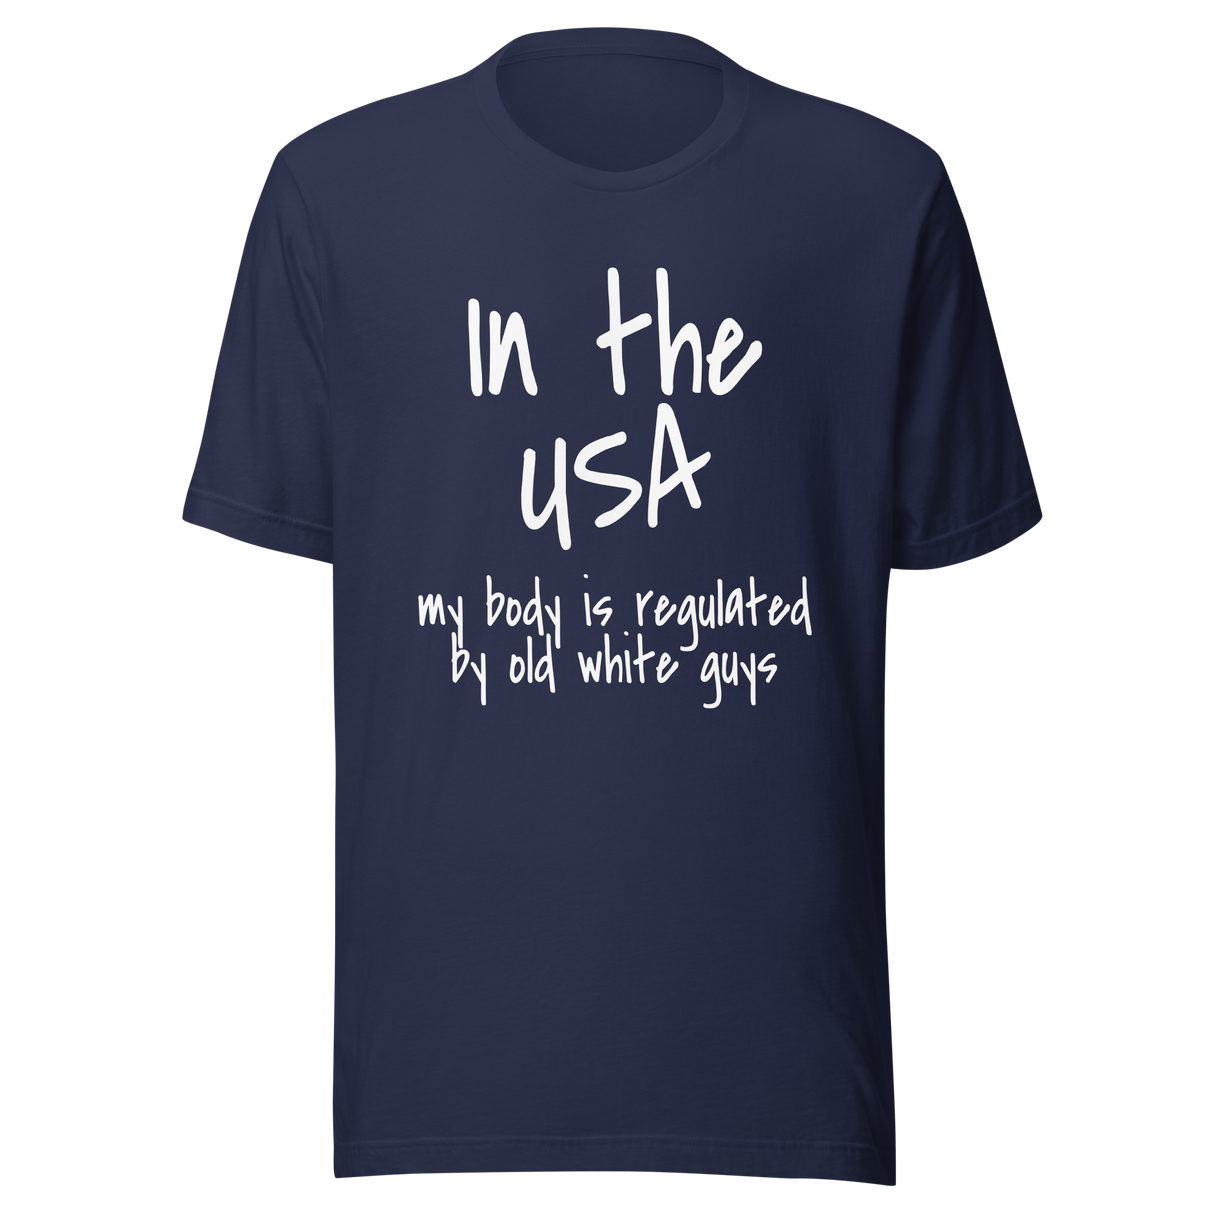 in-the-usa-my-body-is-regulated-by-old-white-guys-usa-tee-body-t-shirt-regulated-tee-t-shirt-tee#color_navy